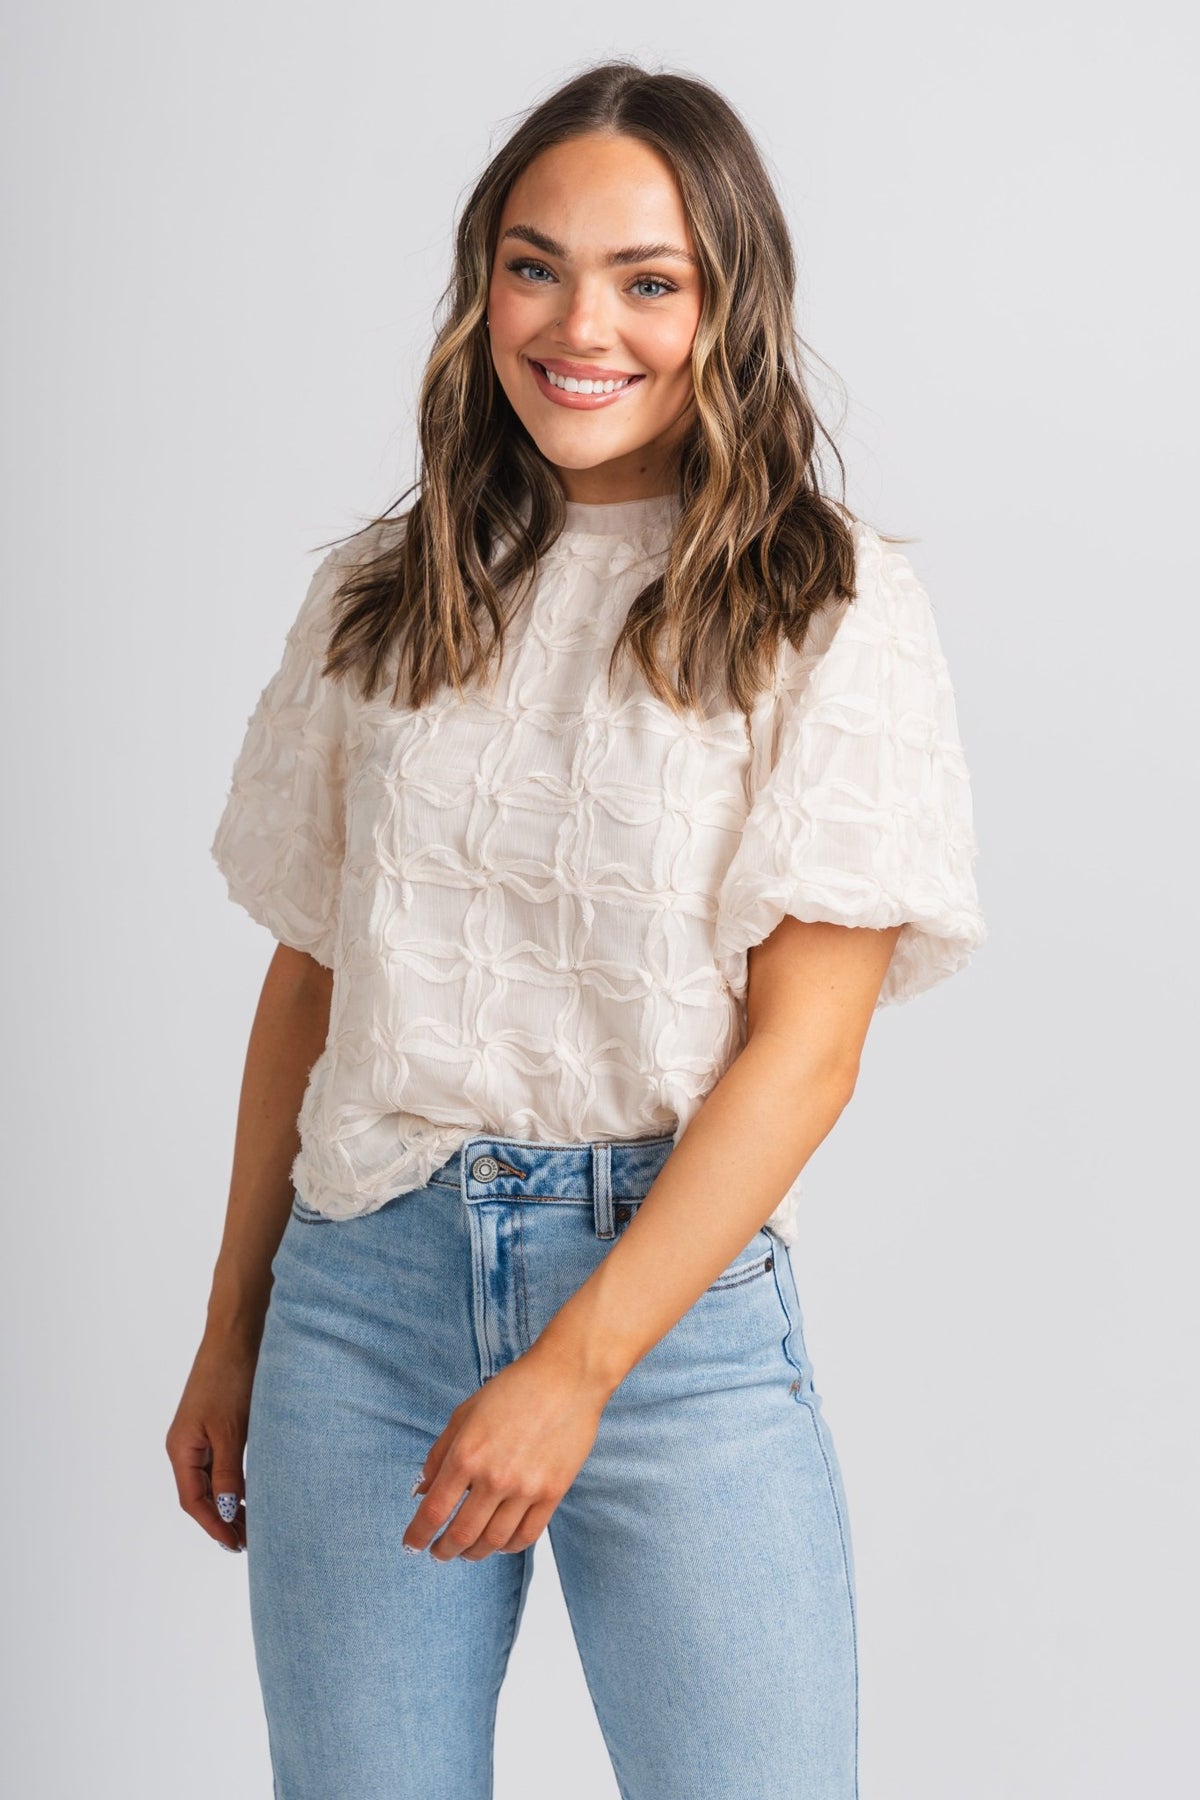 Tulle puff sleeve top cream - Stylish Top - Cute Easter Outfits at Lush Fashion Lounge Boutique in Oklahoma